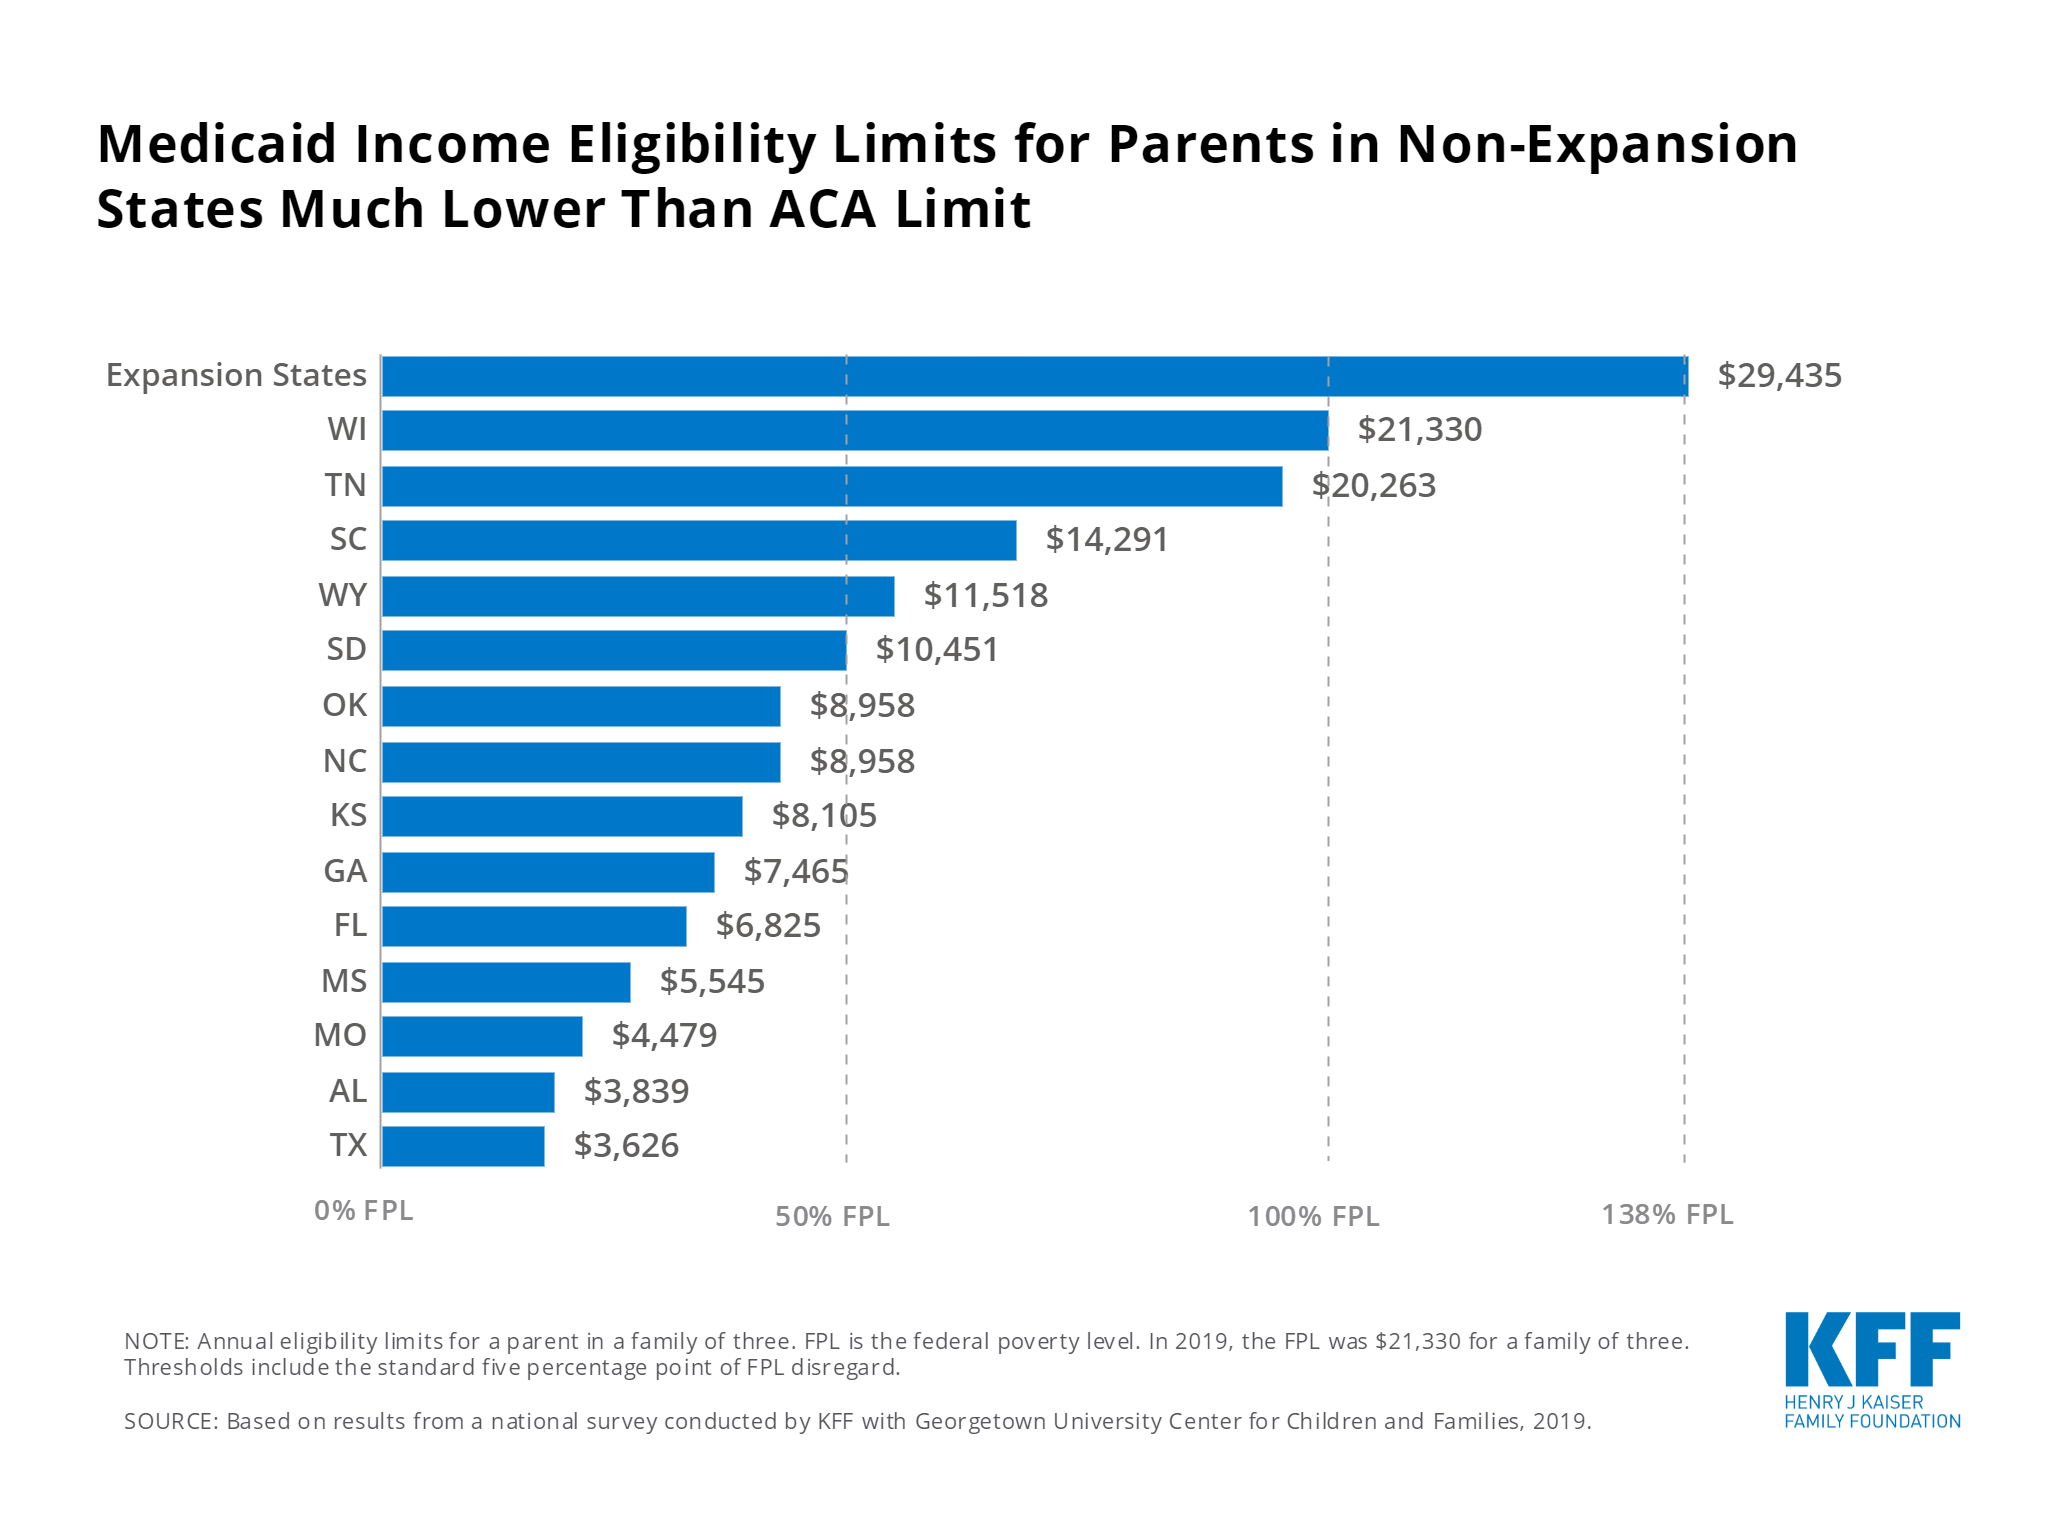 Medicaid Eligibility Limits for Parents in NonExpansion States